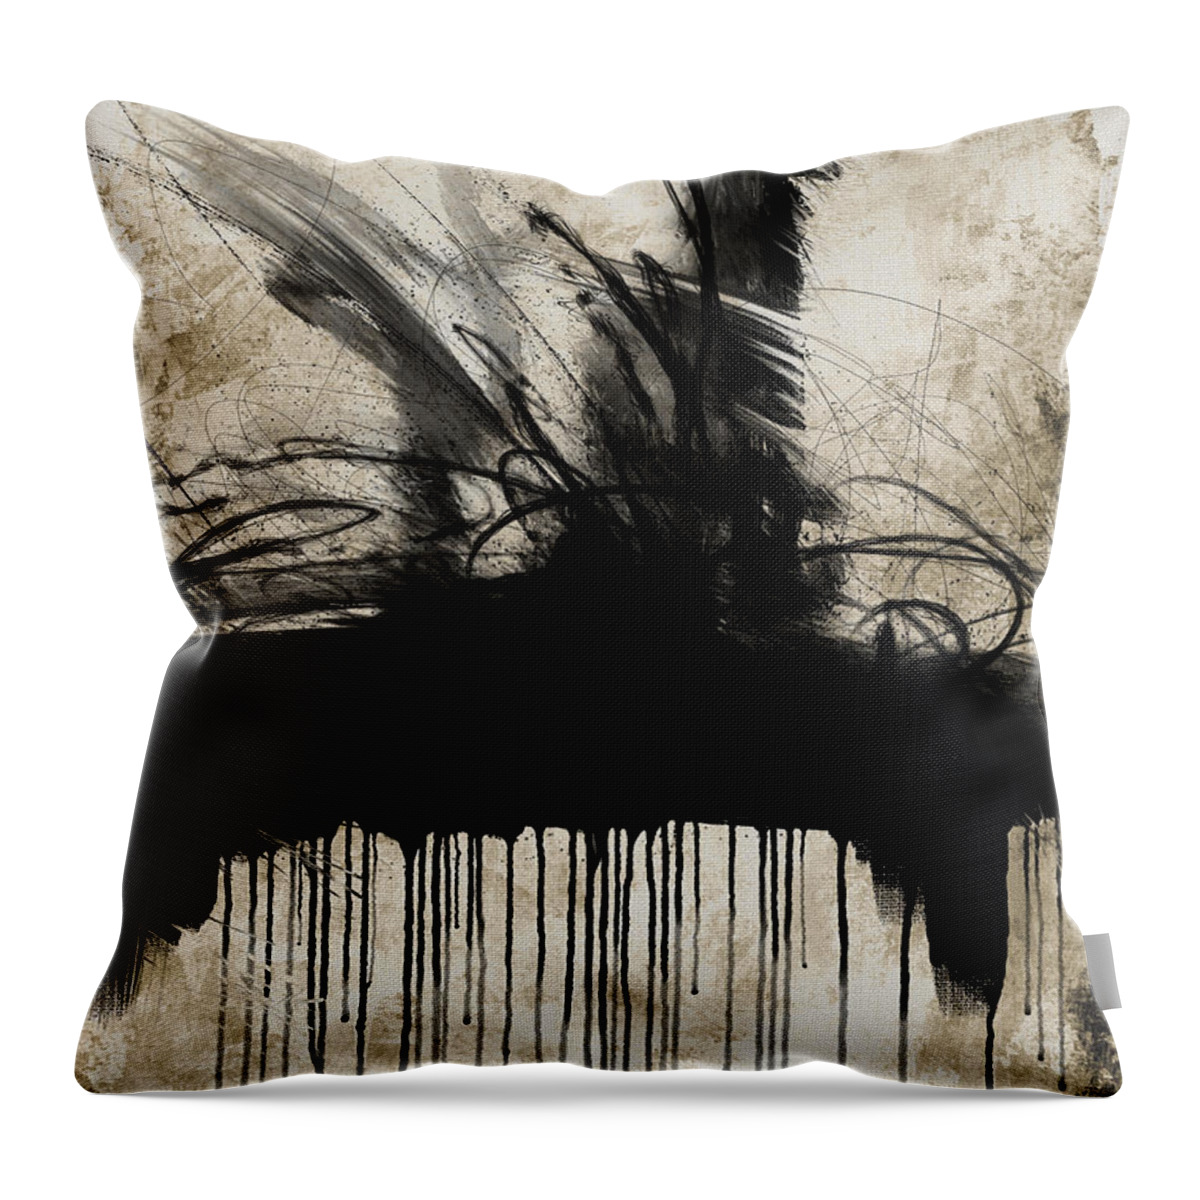 Abstract Throw Pillow featuring the digital art Chaos Drips Away by Shawn Conn